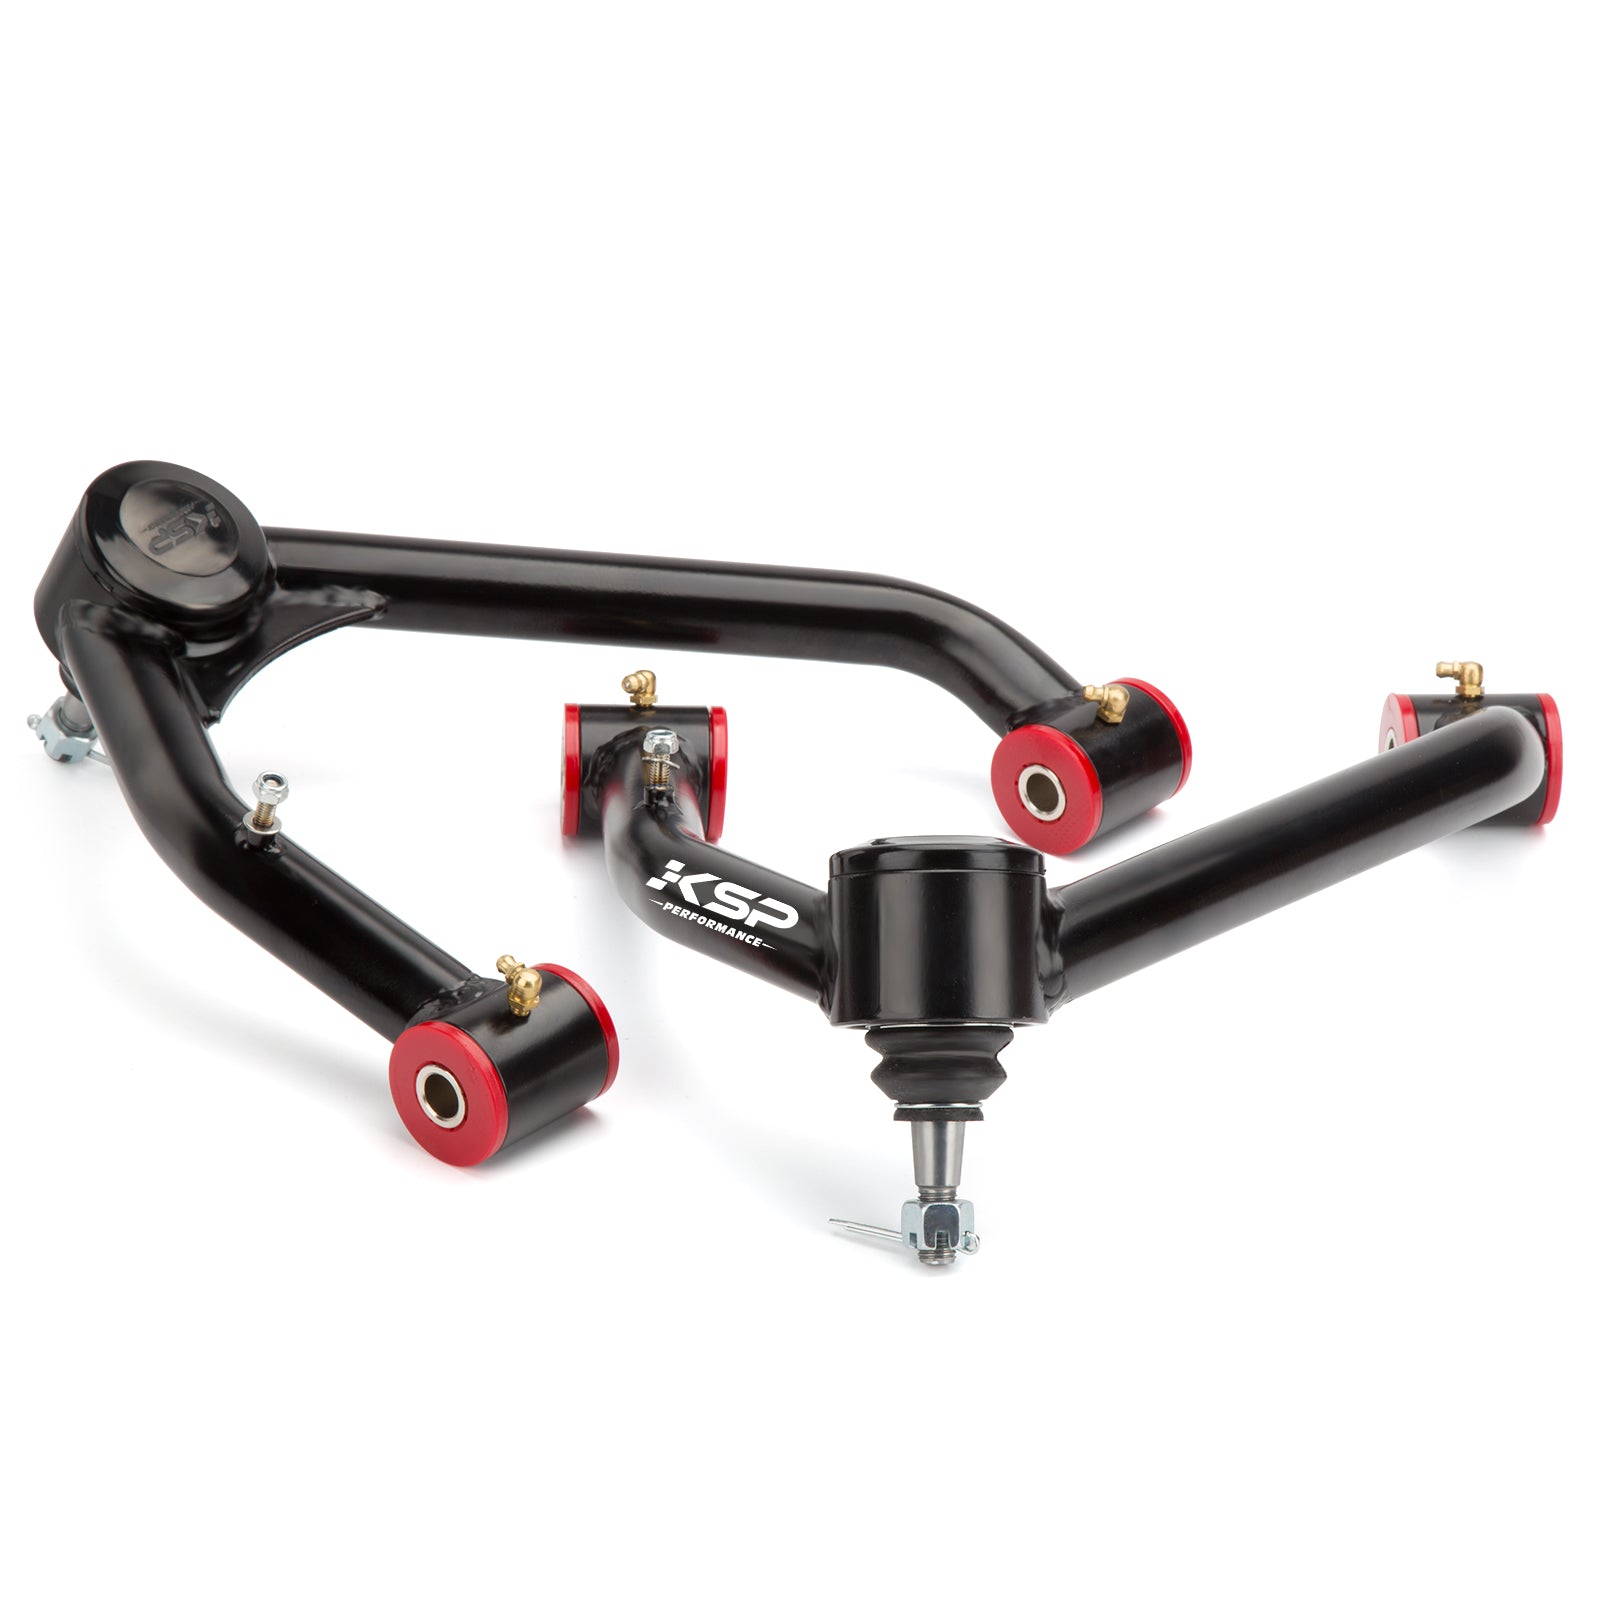 Upper Control Arm Lifts For 2"-4" Lift 2007-2016 Chevy Silverado 1500 xccscss.